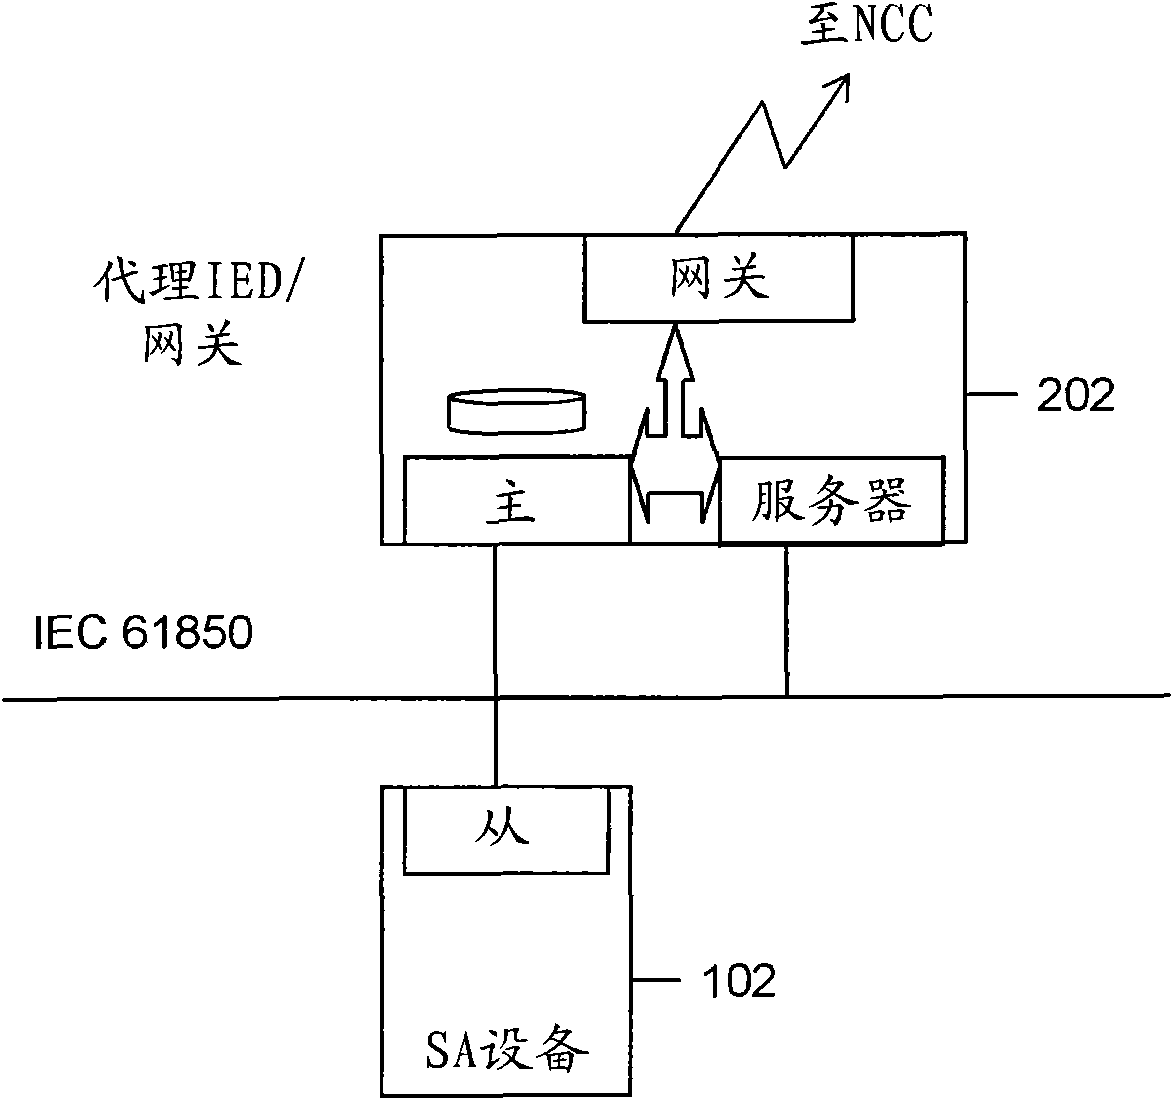 Method of configuring an intelligent electronic device